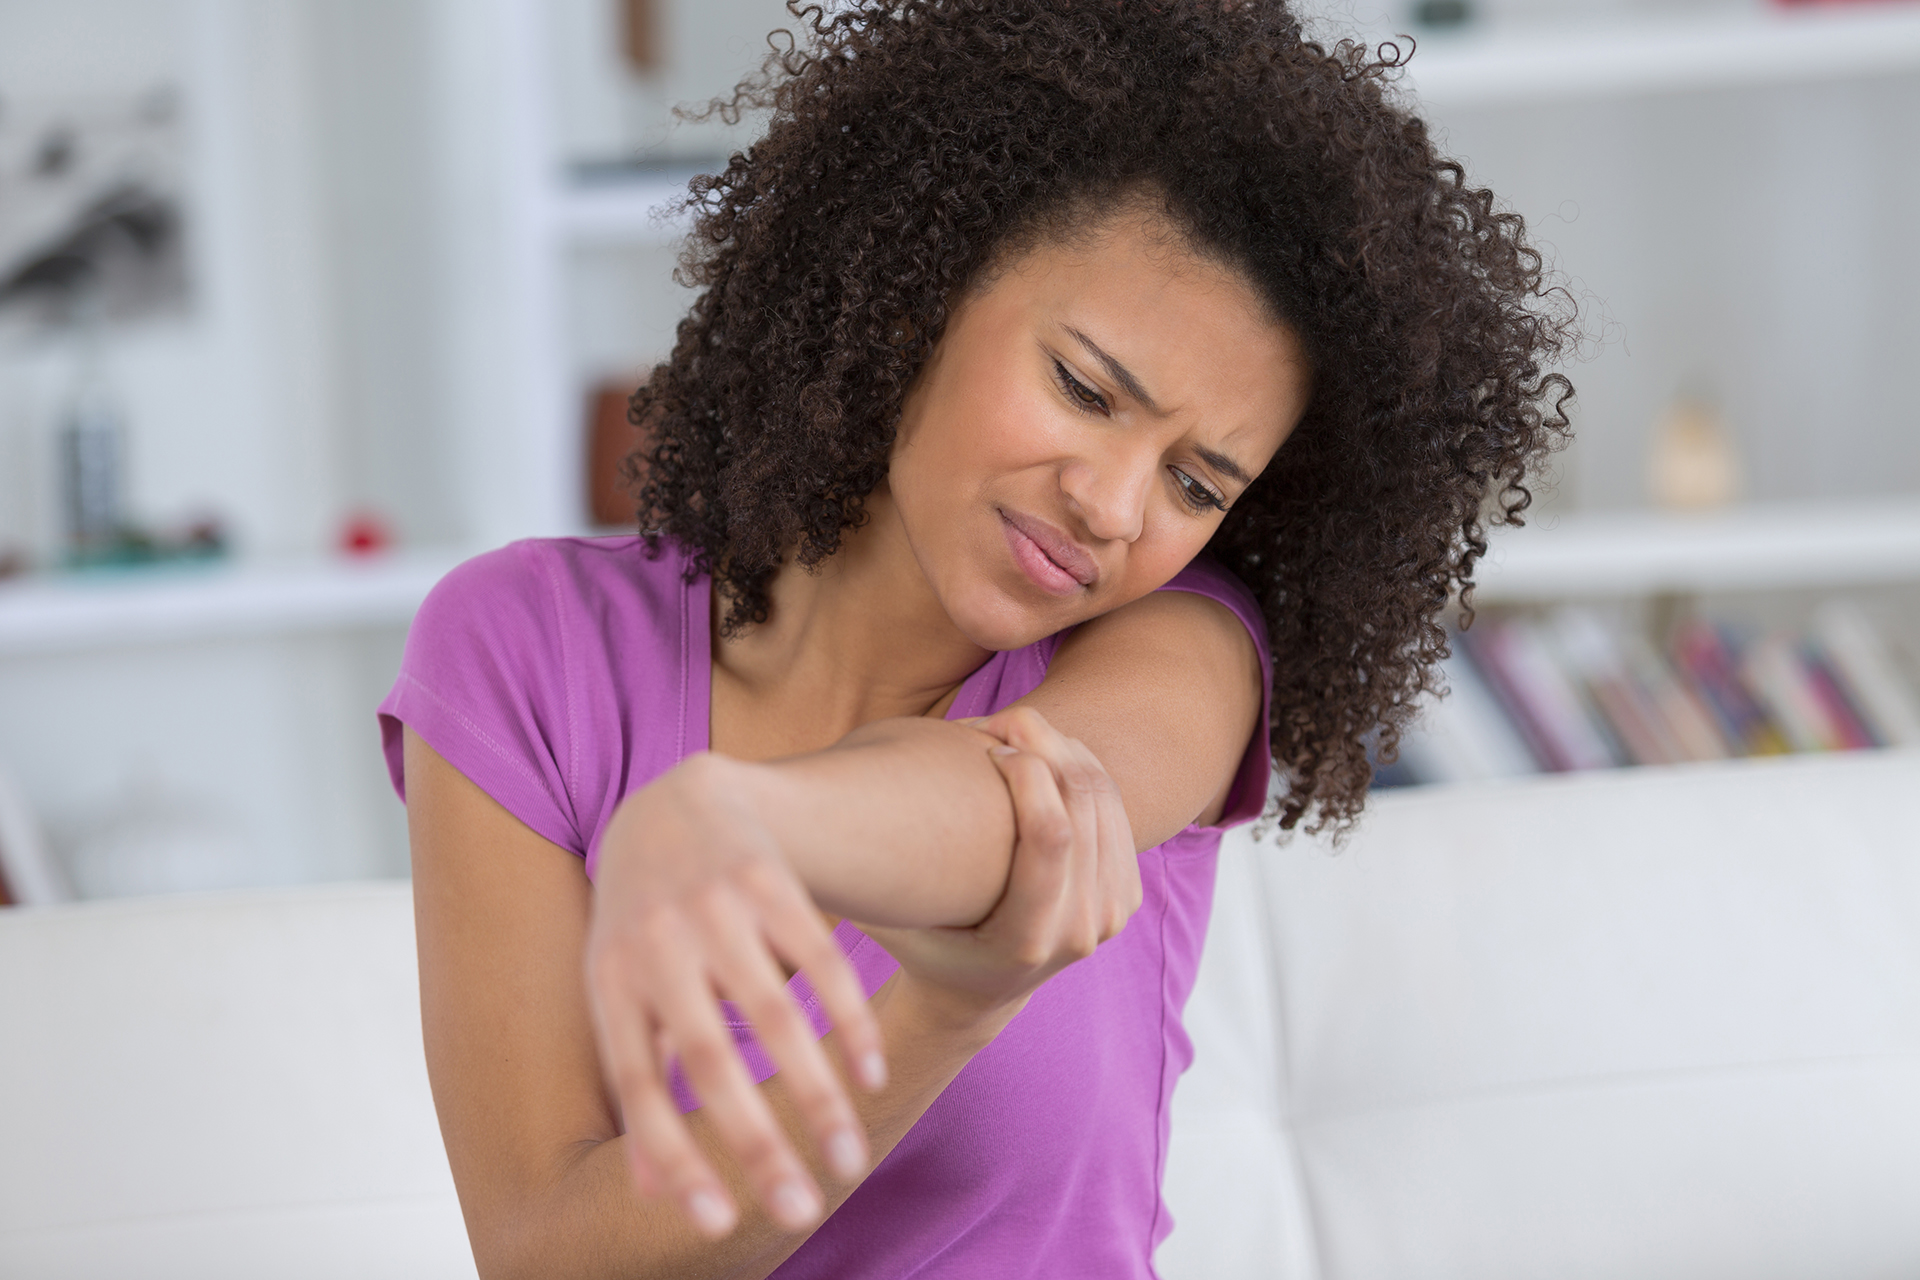 How Do I Know If My Elbow Injury Is Serious?